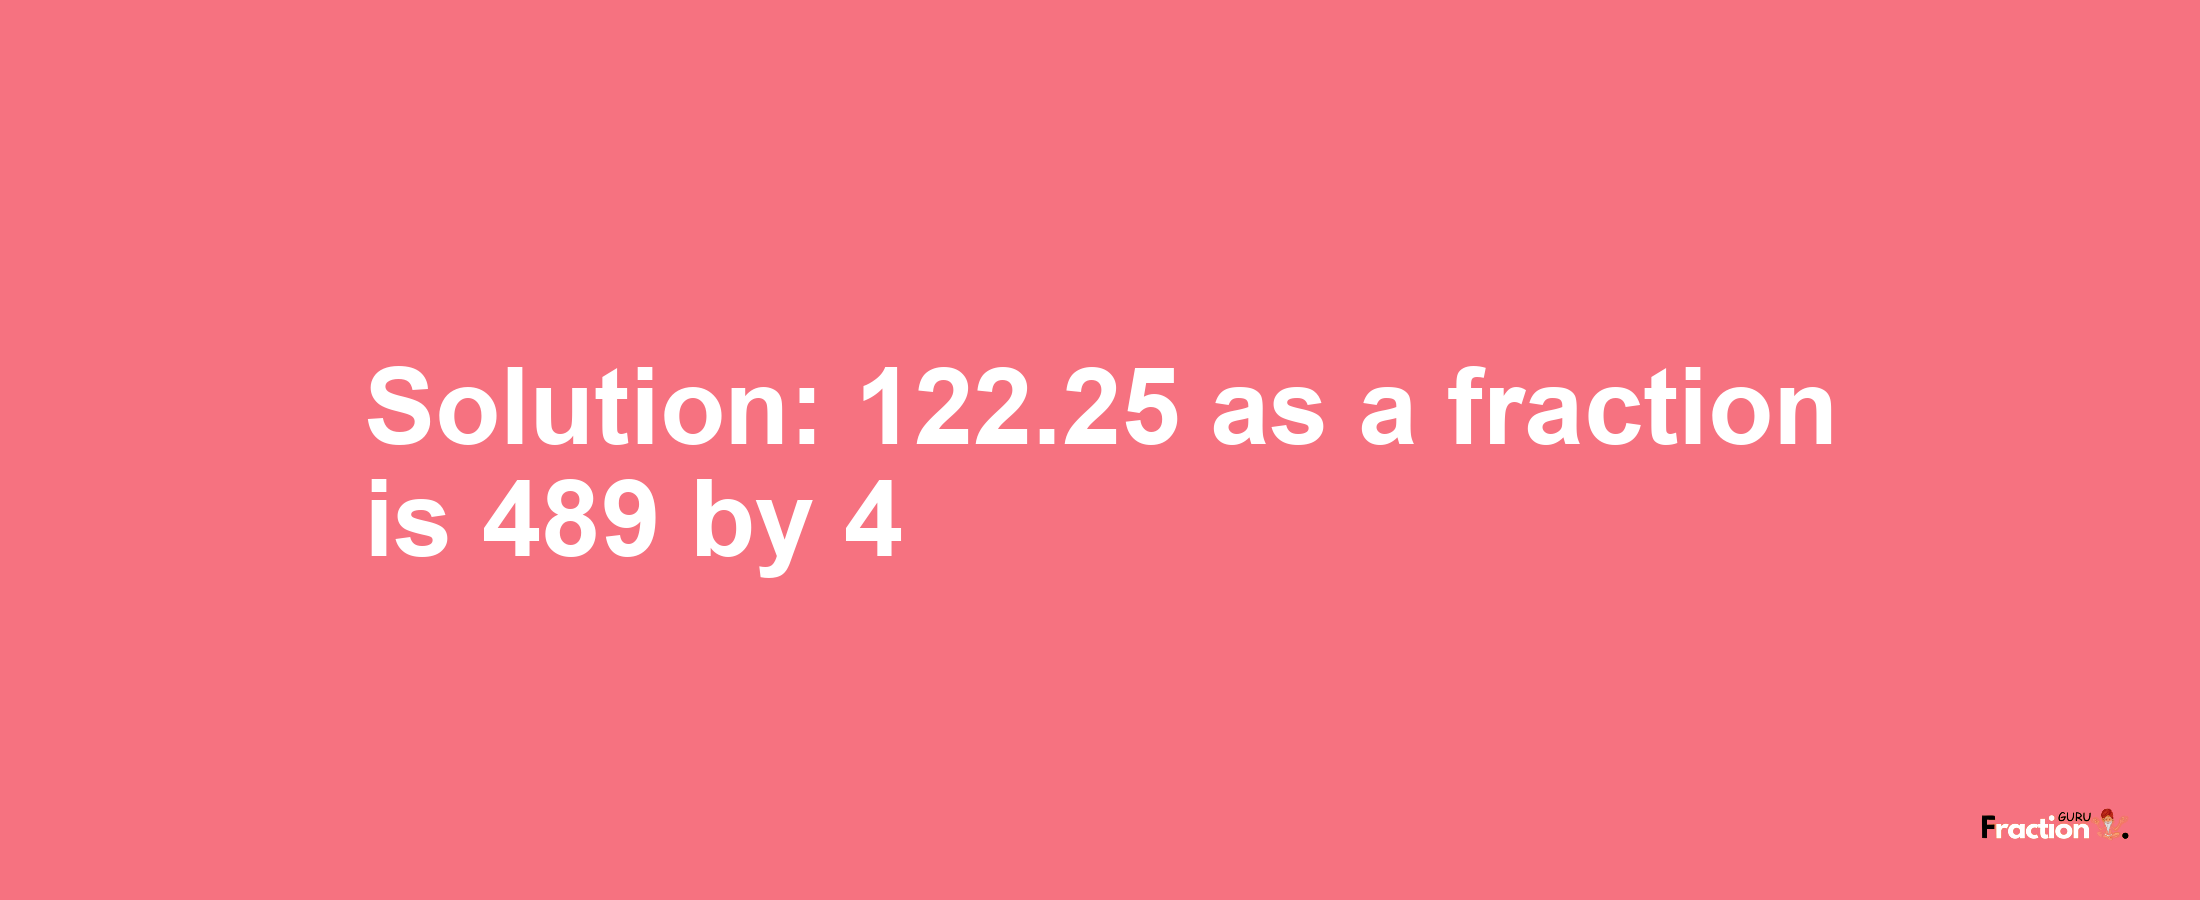 Solution:122.25 as a fraction is 489/4